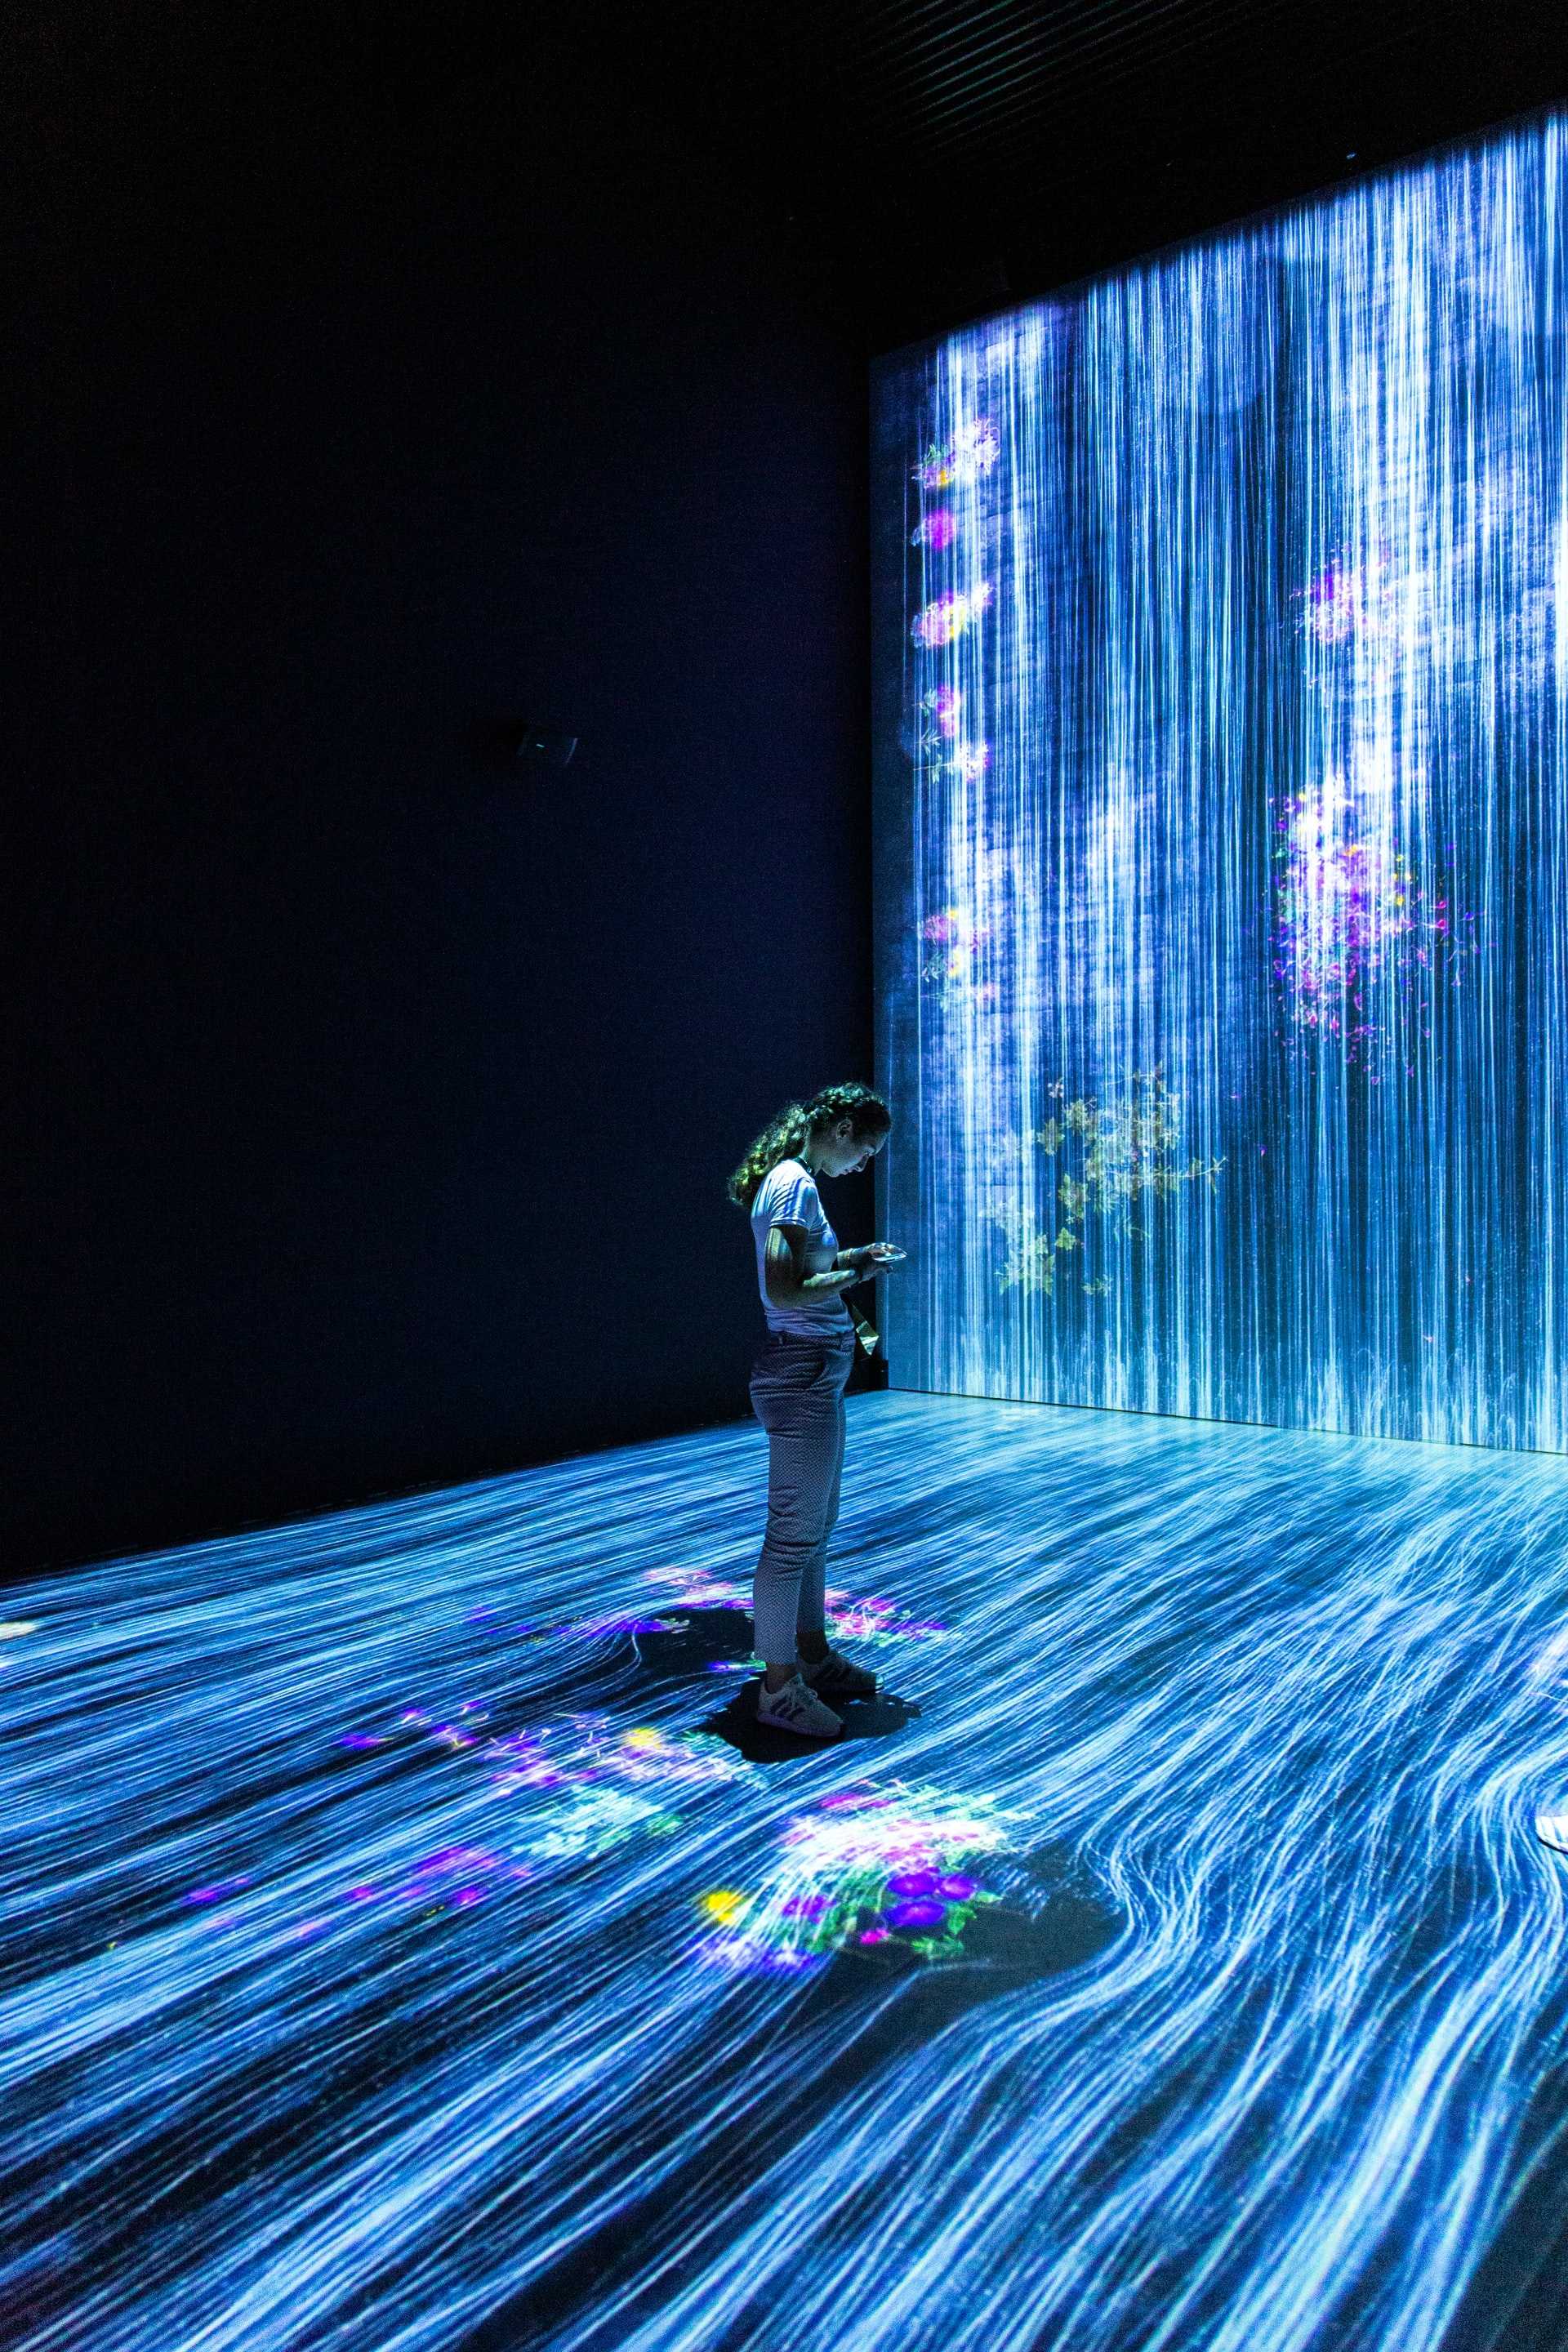 A woman stands in a projected waterfall composed of circuit and data symbols.